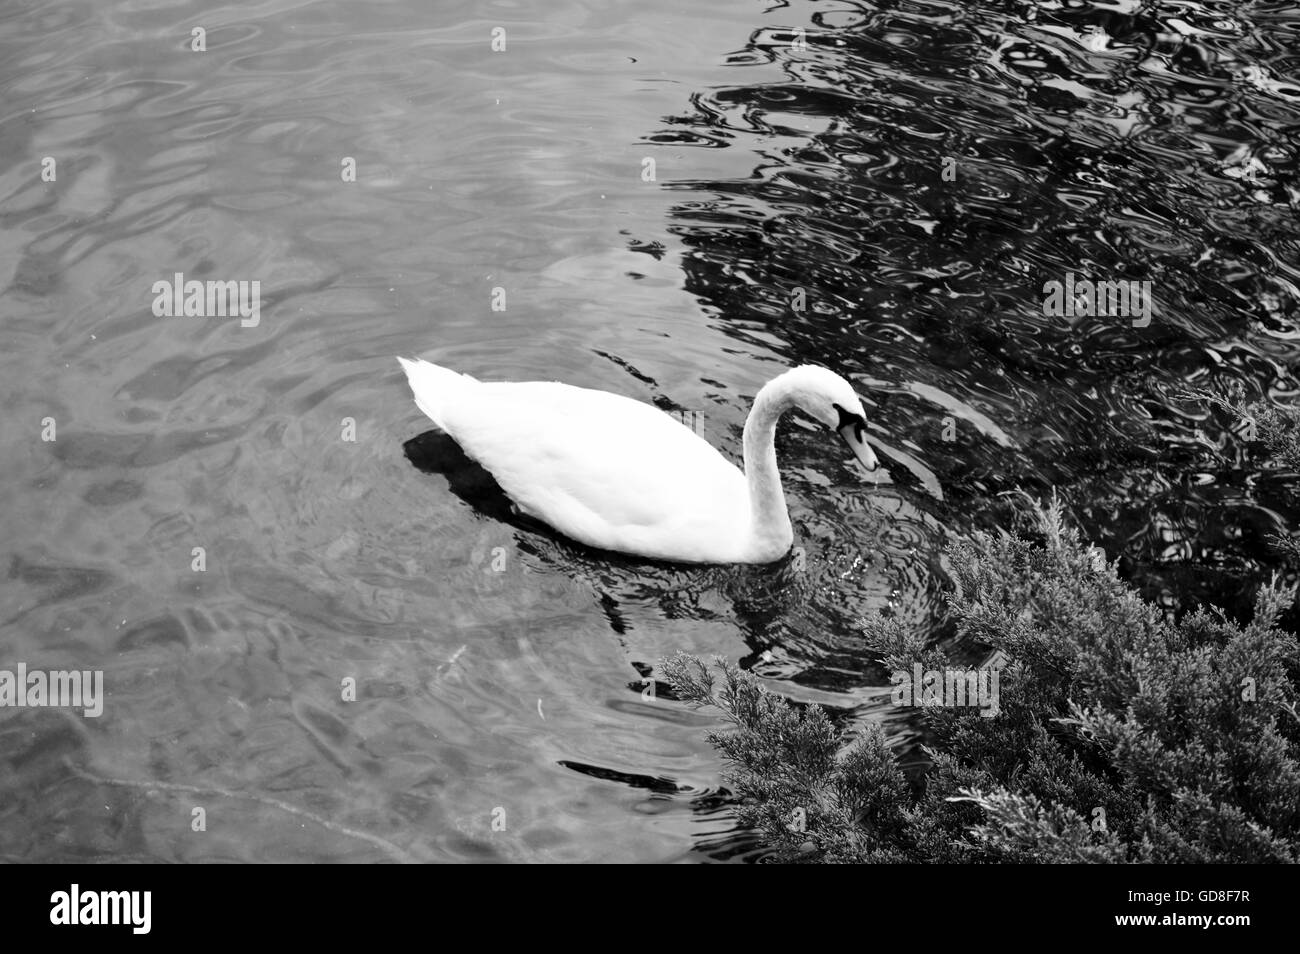 One Swan in Lago di Lugano in Switzerland. The picture is black and white. Stock Photo